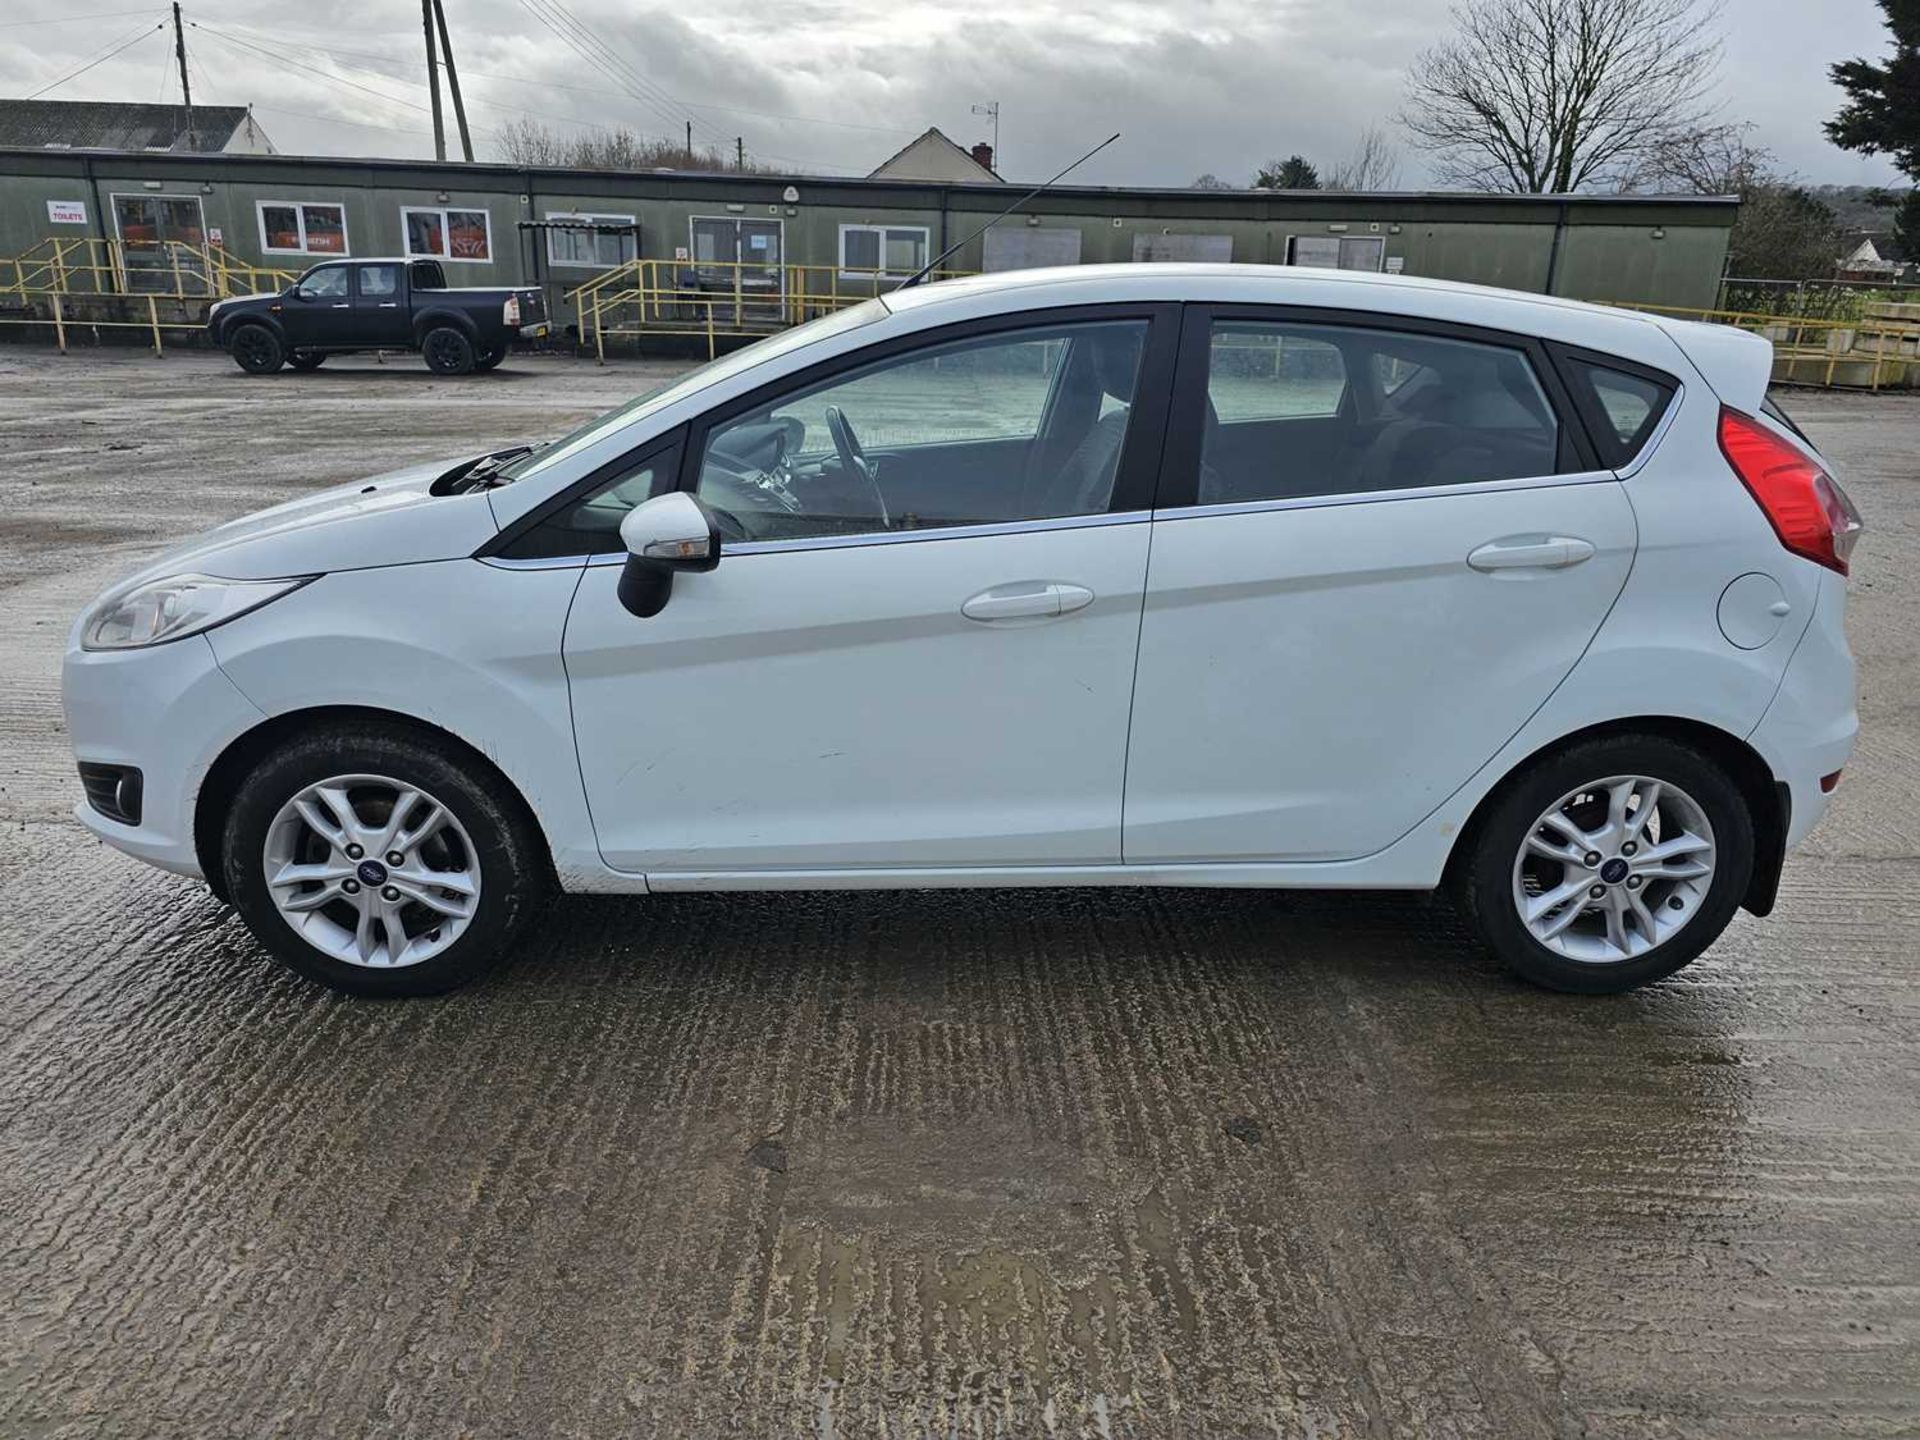 2015 Ford Fiesta, 5 Speed, Bluetooth, A/C (Reg. Docs. & Service History Available, Tested 01/25) - Bild 6 aus 28